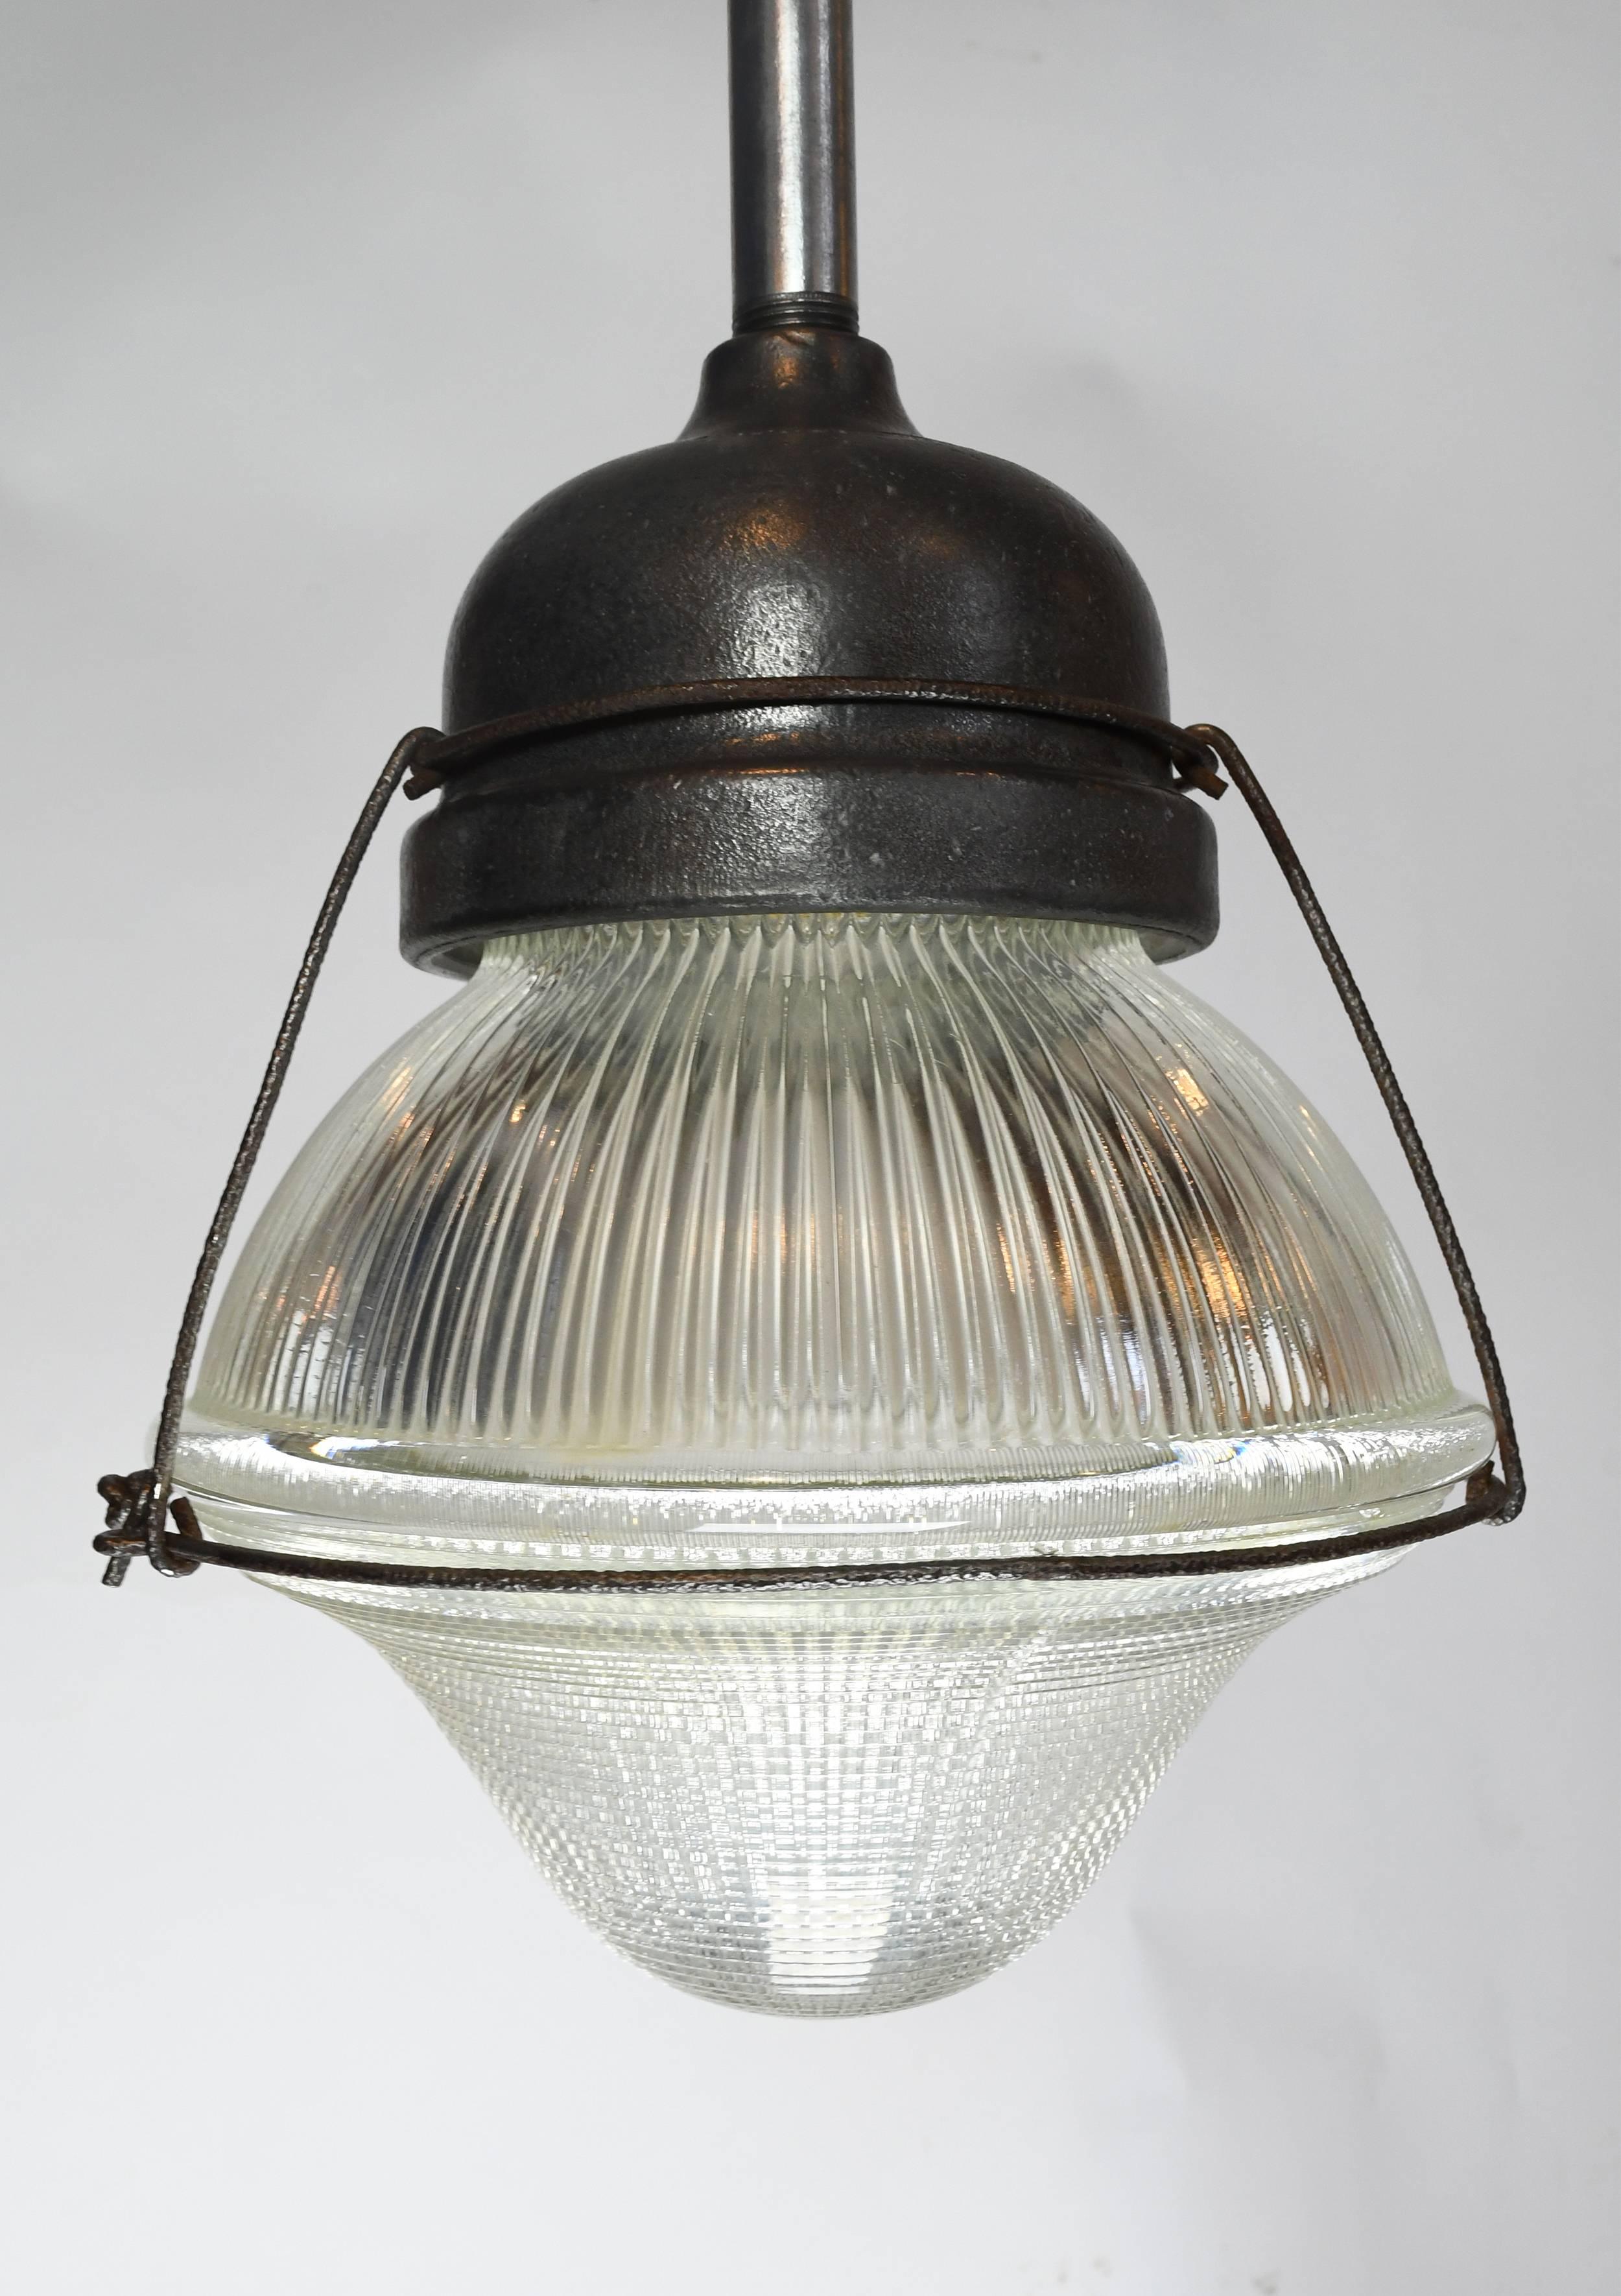 This Holophane acorn pendant is decorated with textured glass and cage around the glass. It will give a clean Industrial look to your space.


We find that early antique lighting was designed as objects of art and we treat each fixture with